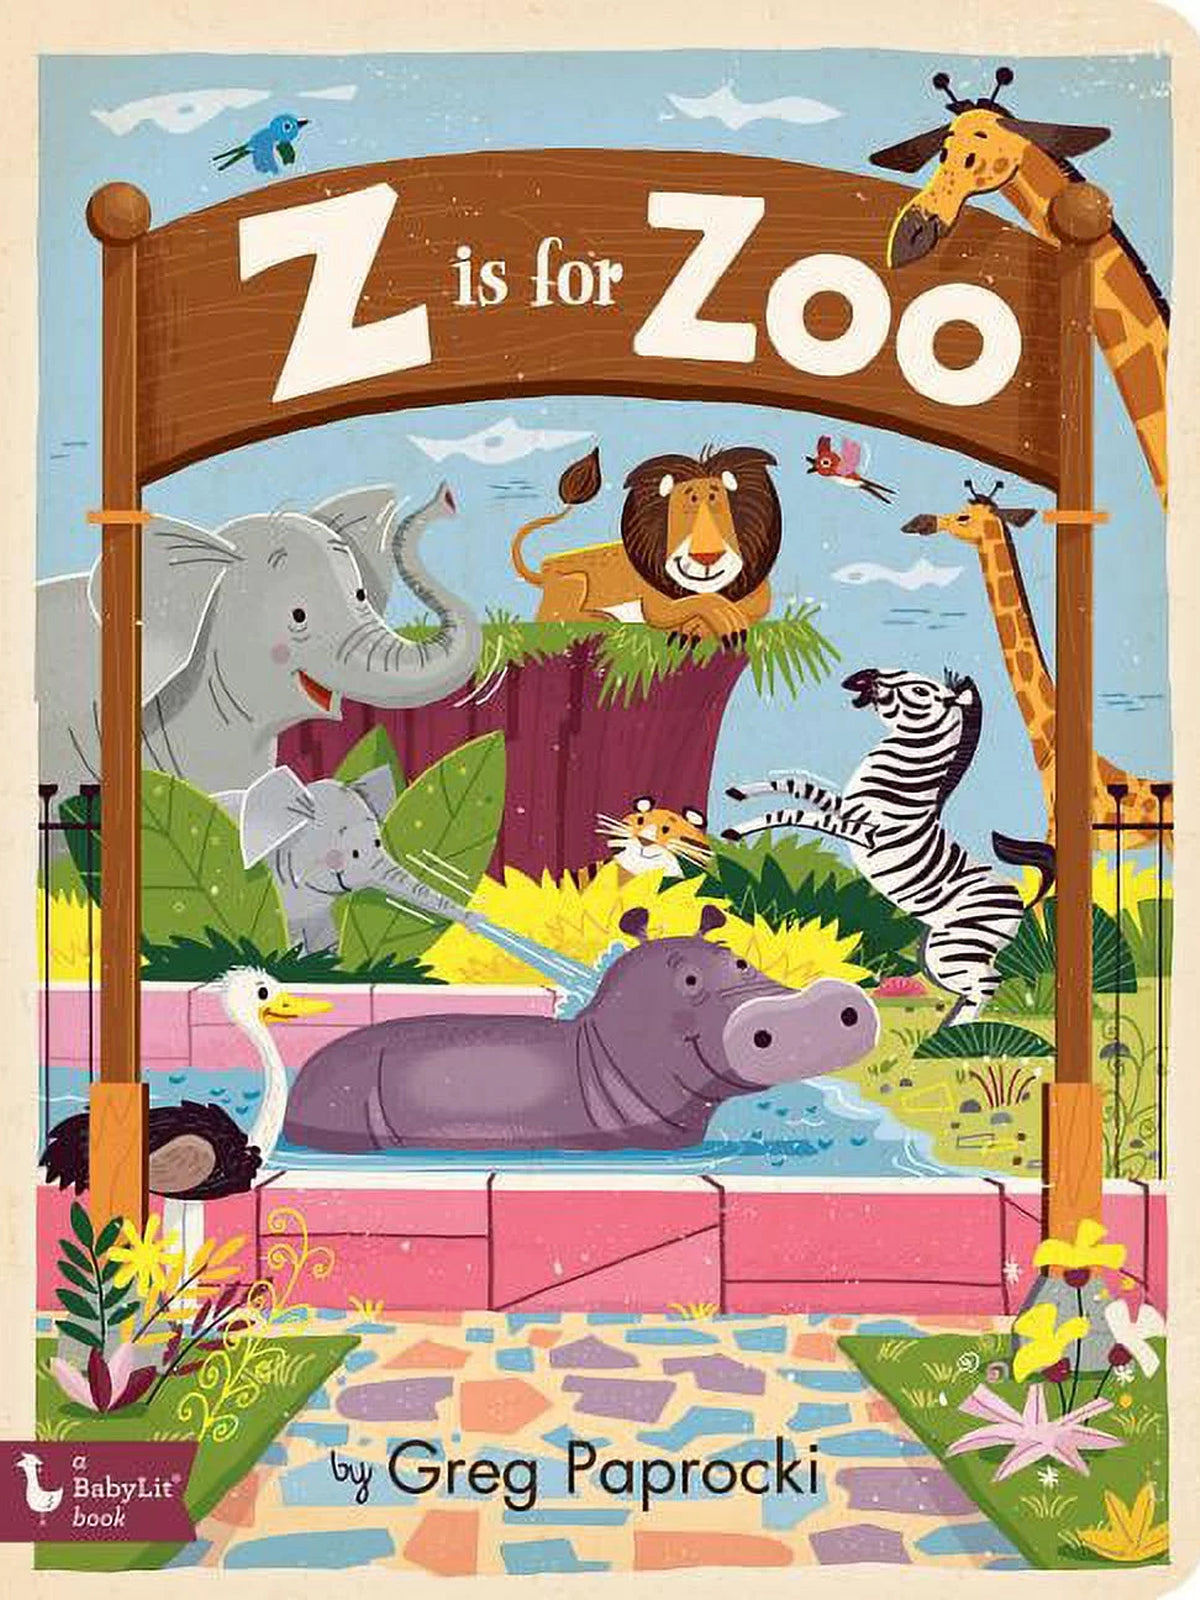 Z is for Zoo Board Book